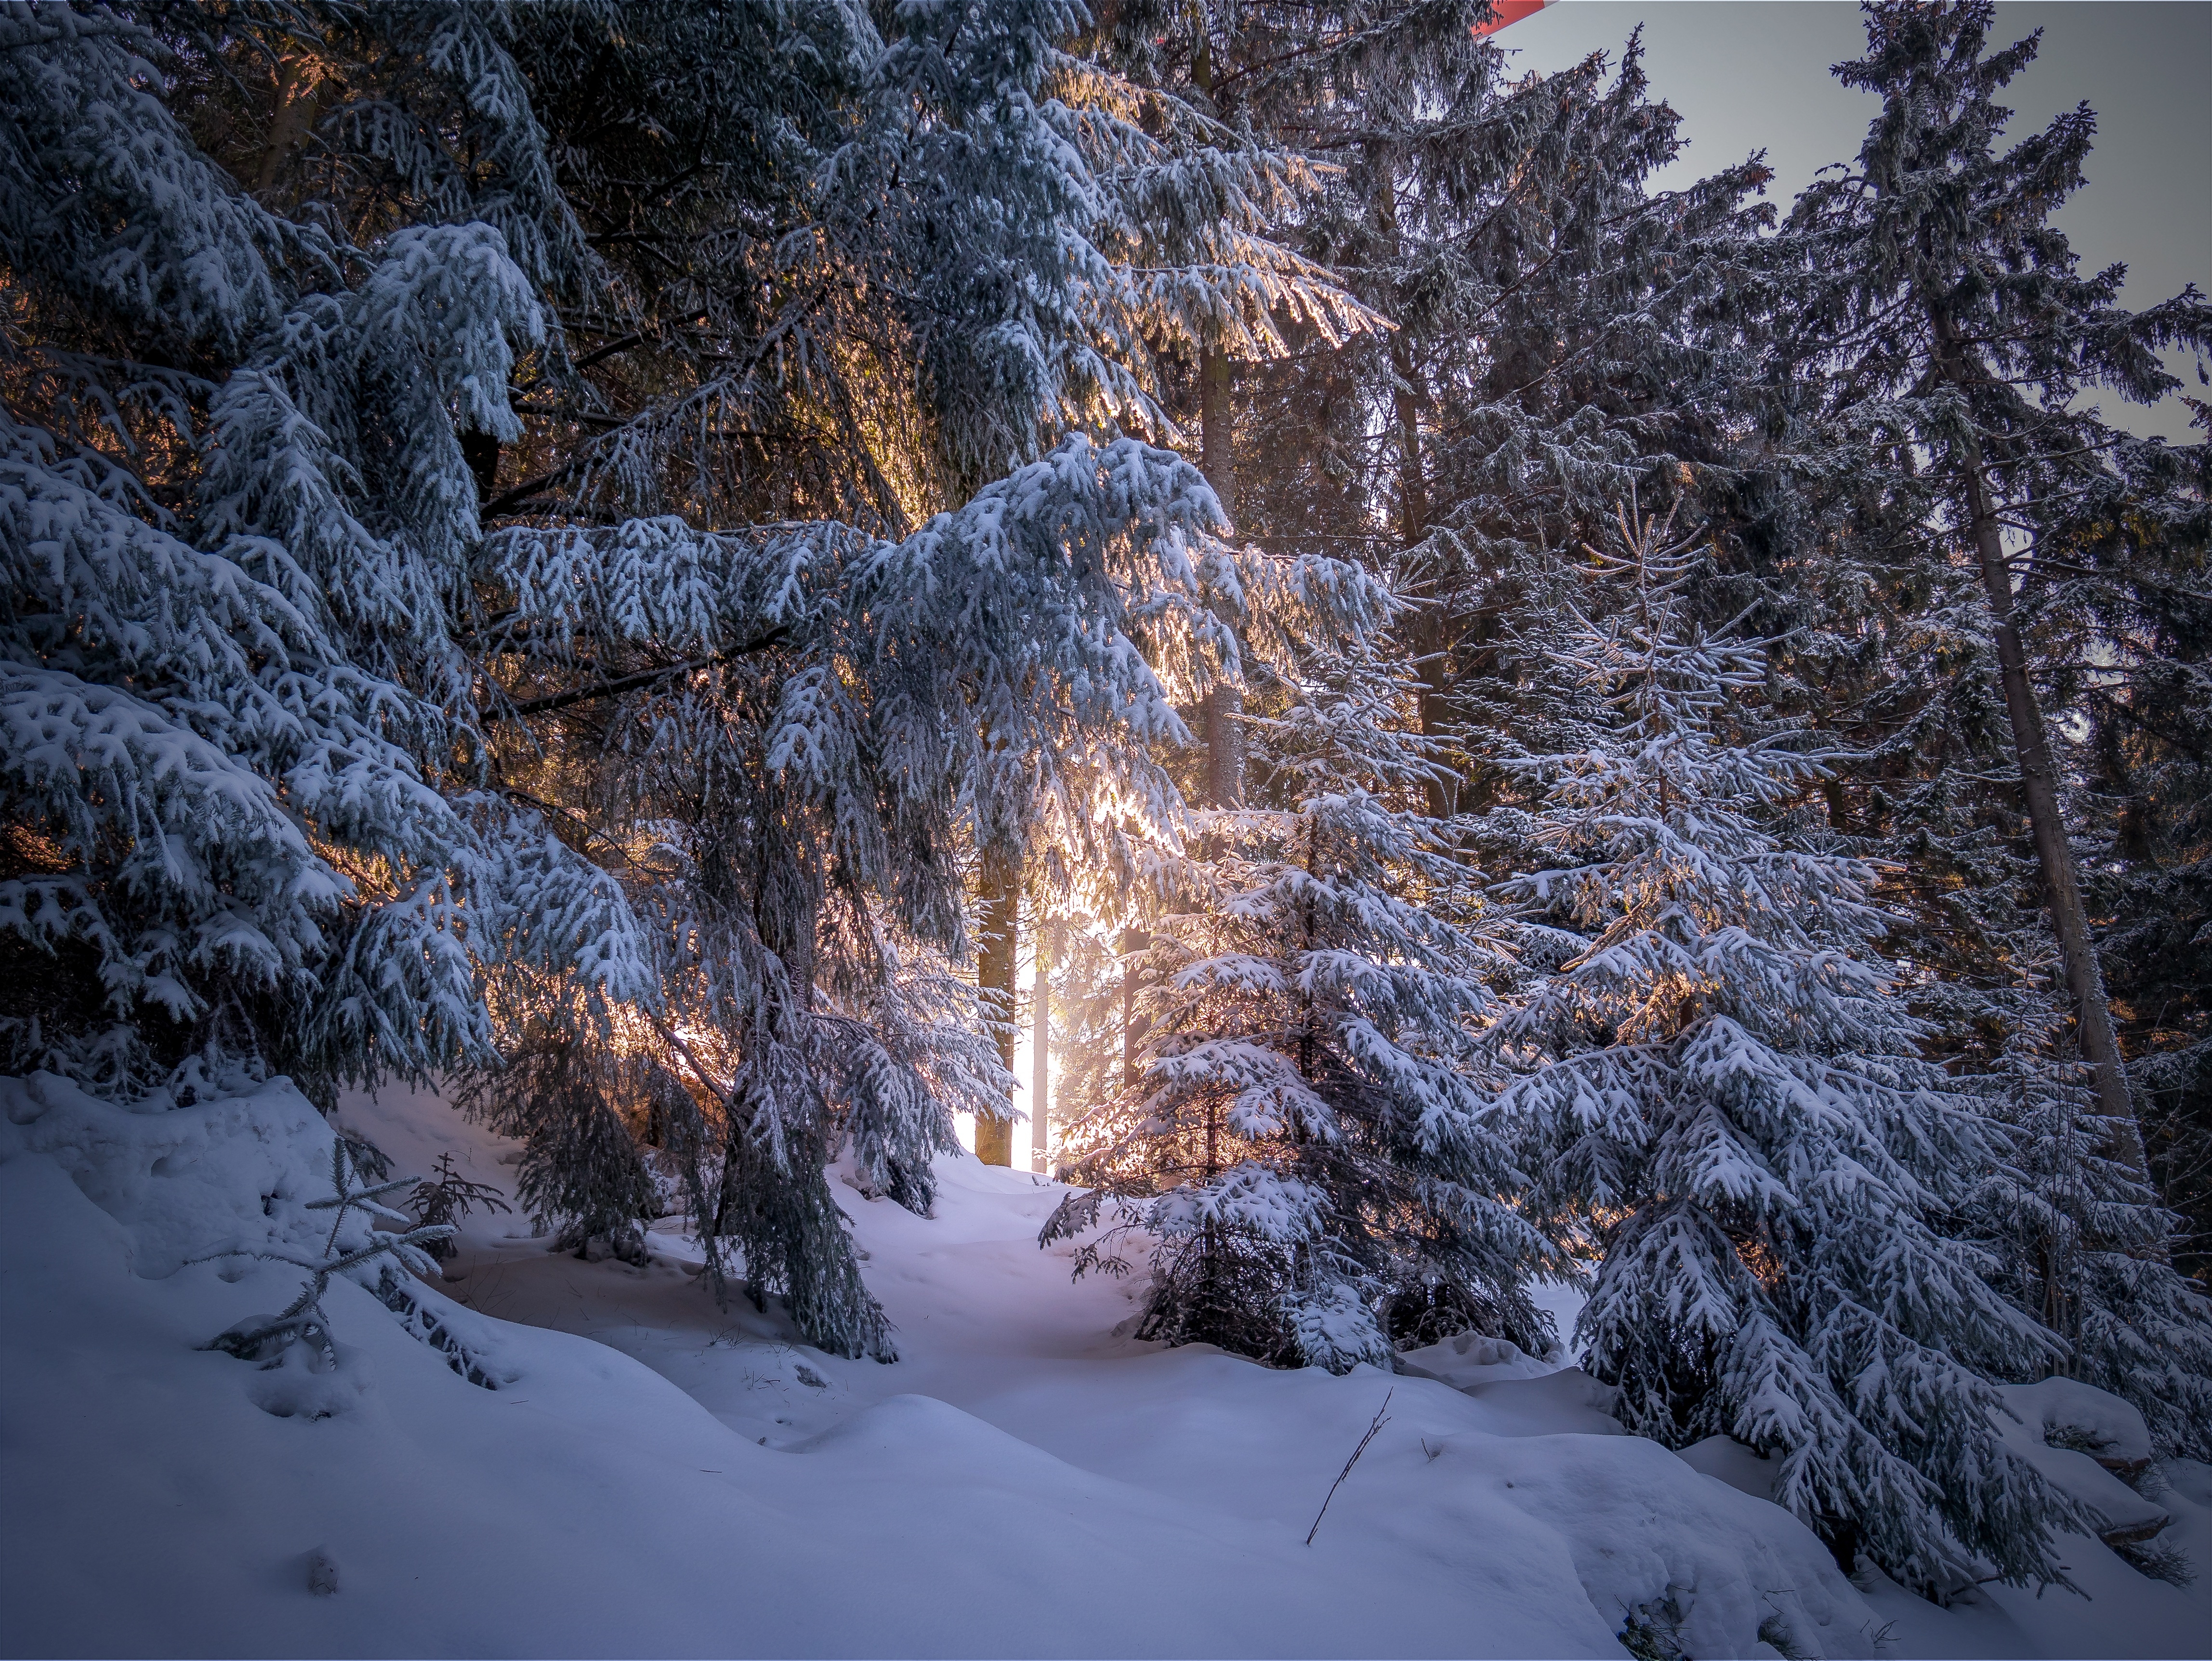 Fir tree branches covered with snow in the evening woods